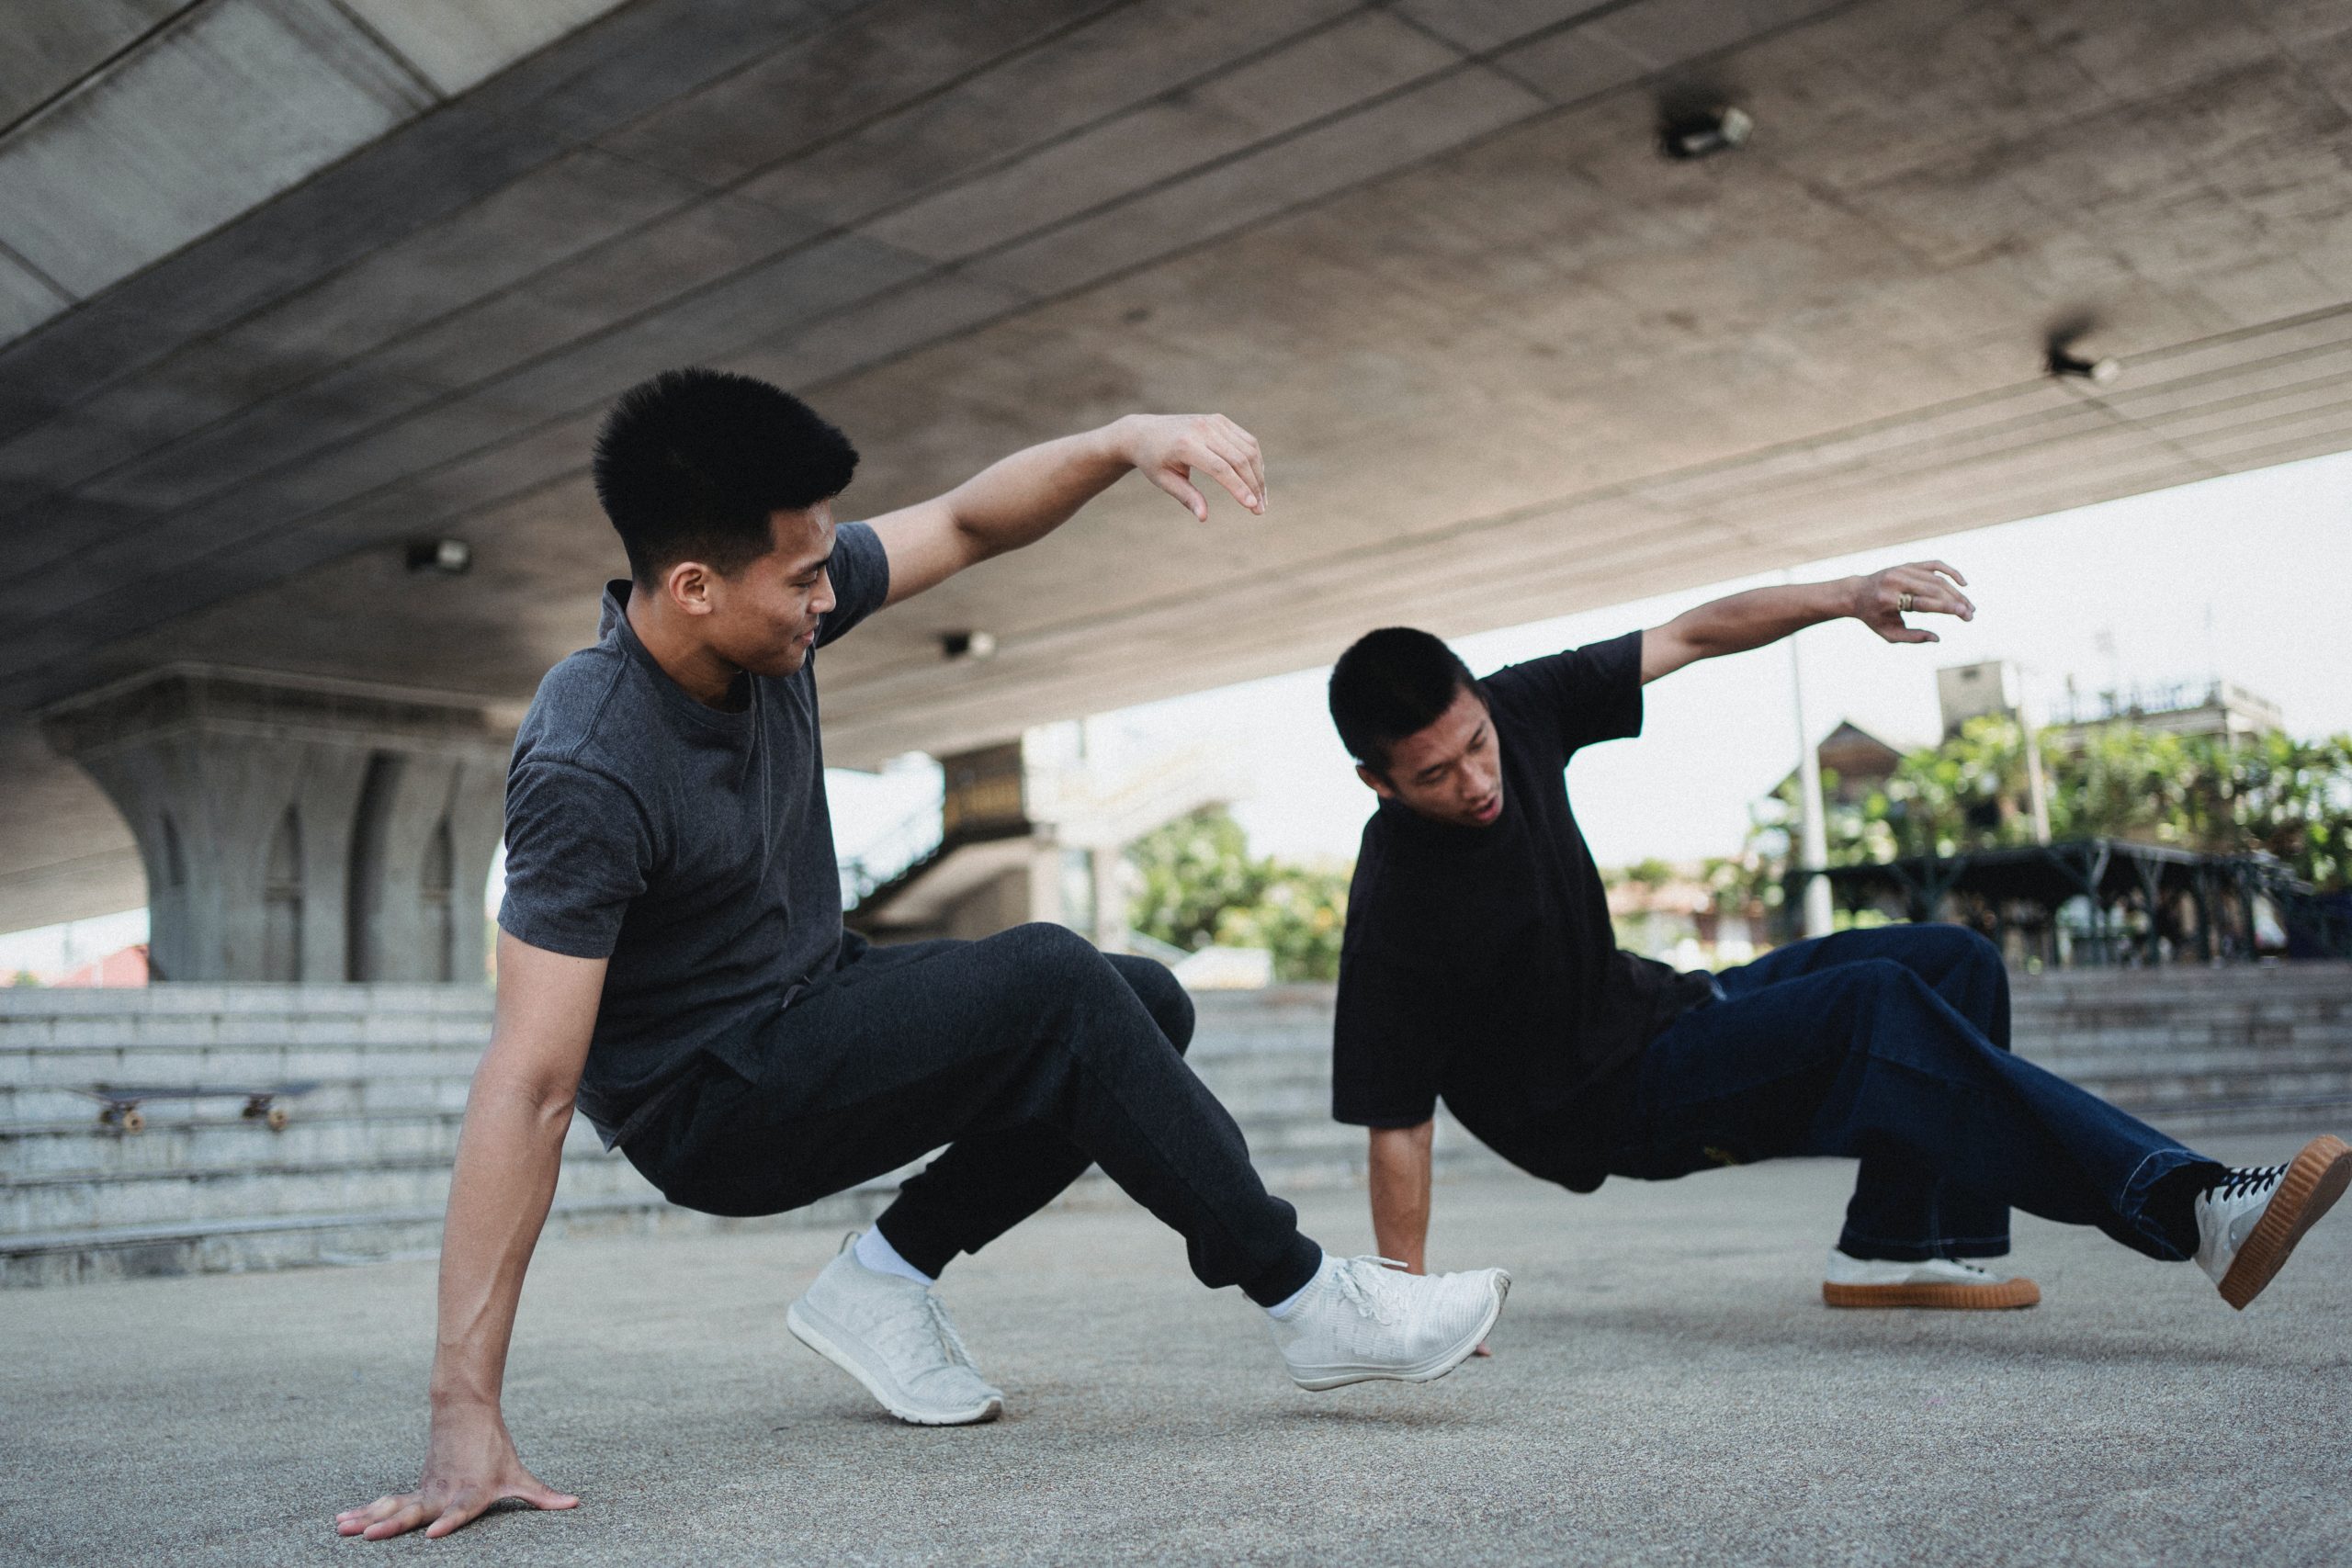 Break dancing - A new ticket for sports brands to China's Gen Z?